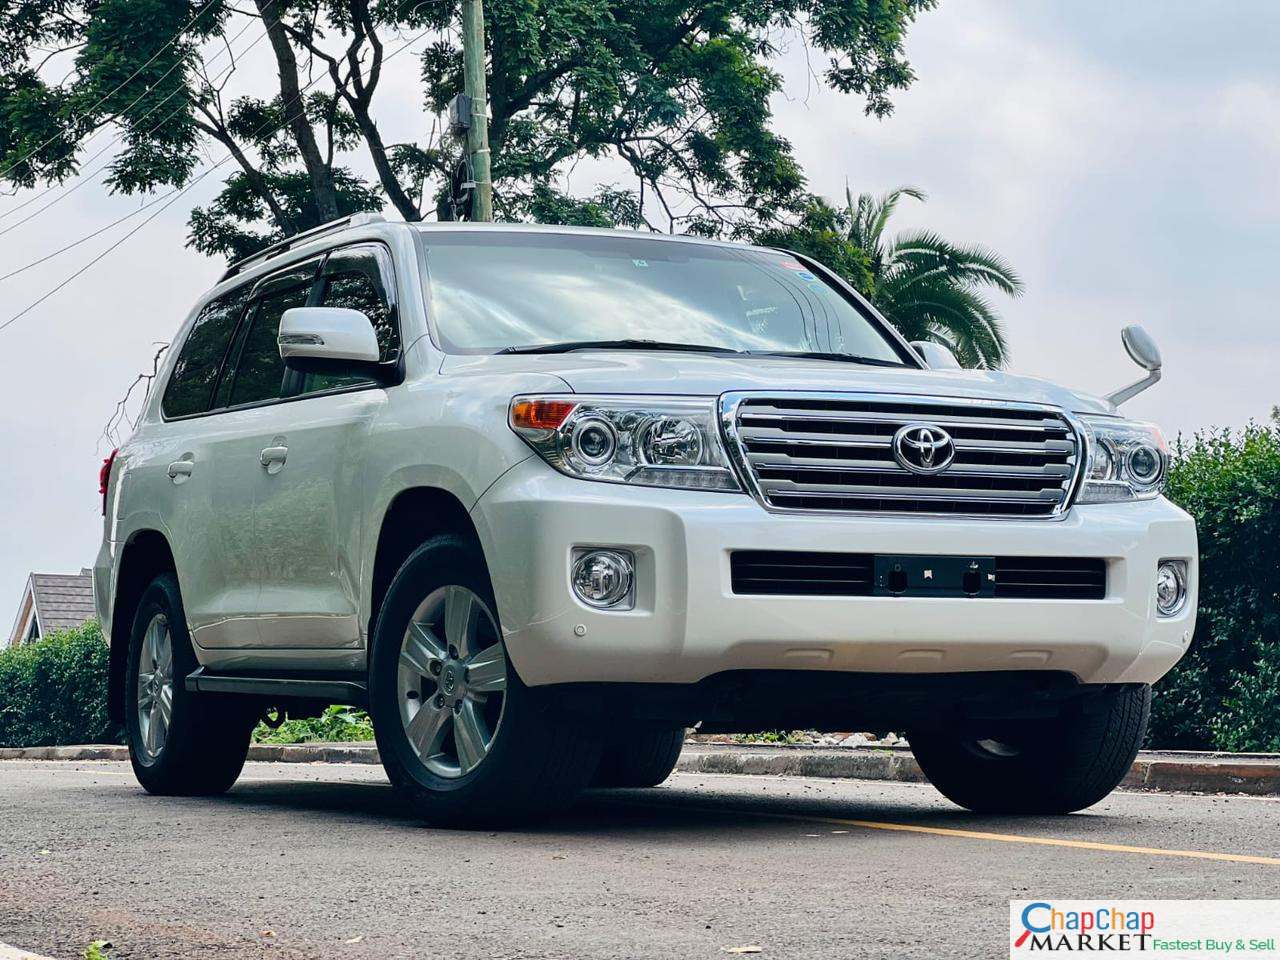 Toyota Land cruiser V8 AXG CHEAPEST HIRE PURCHASE EXCLUSIVE